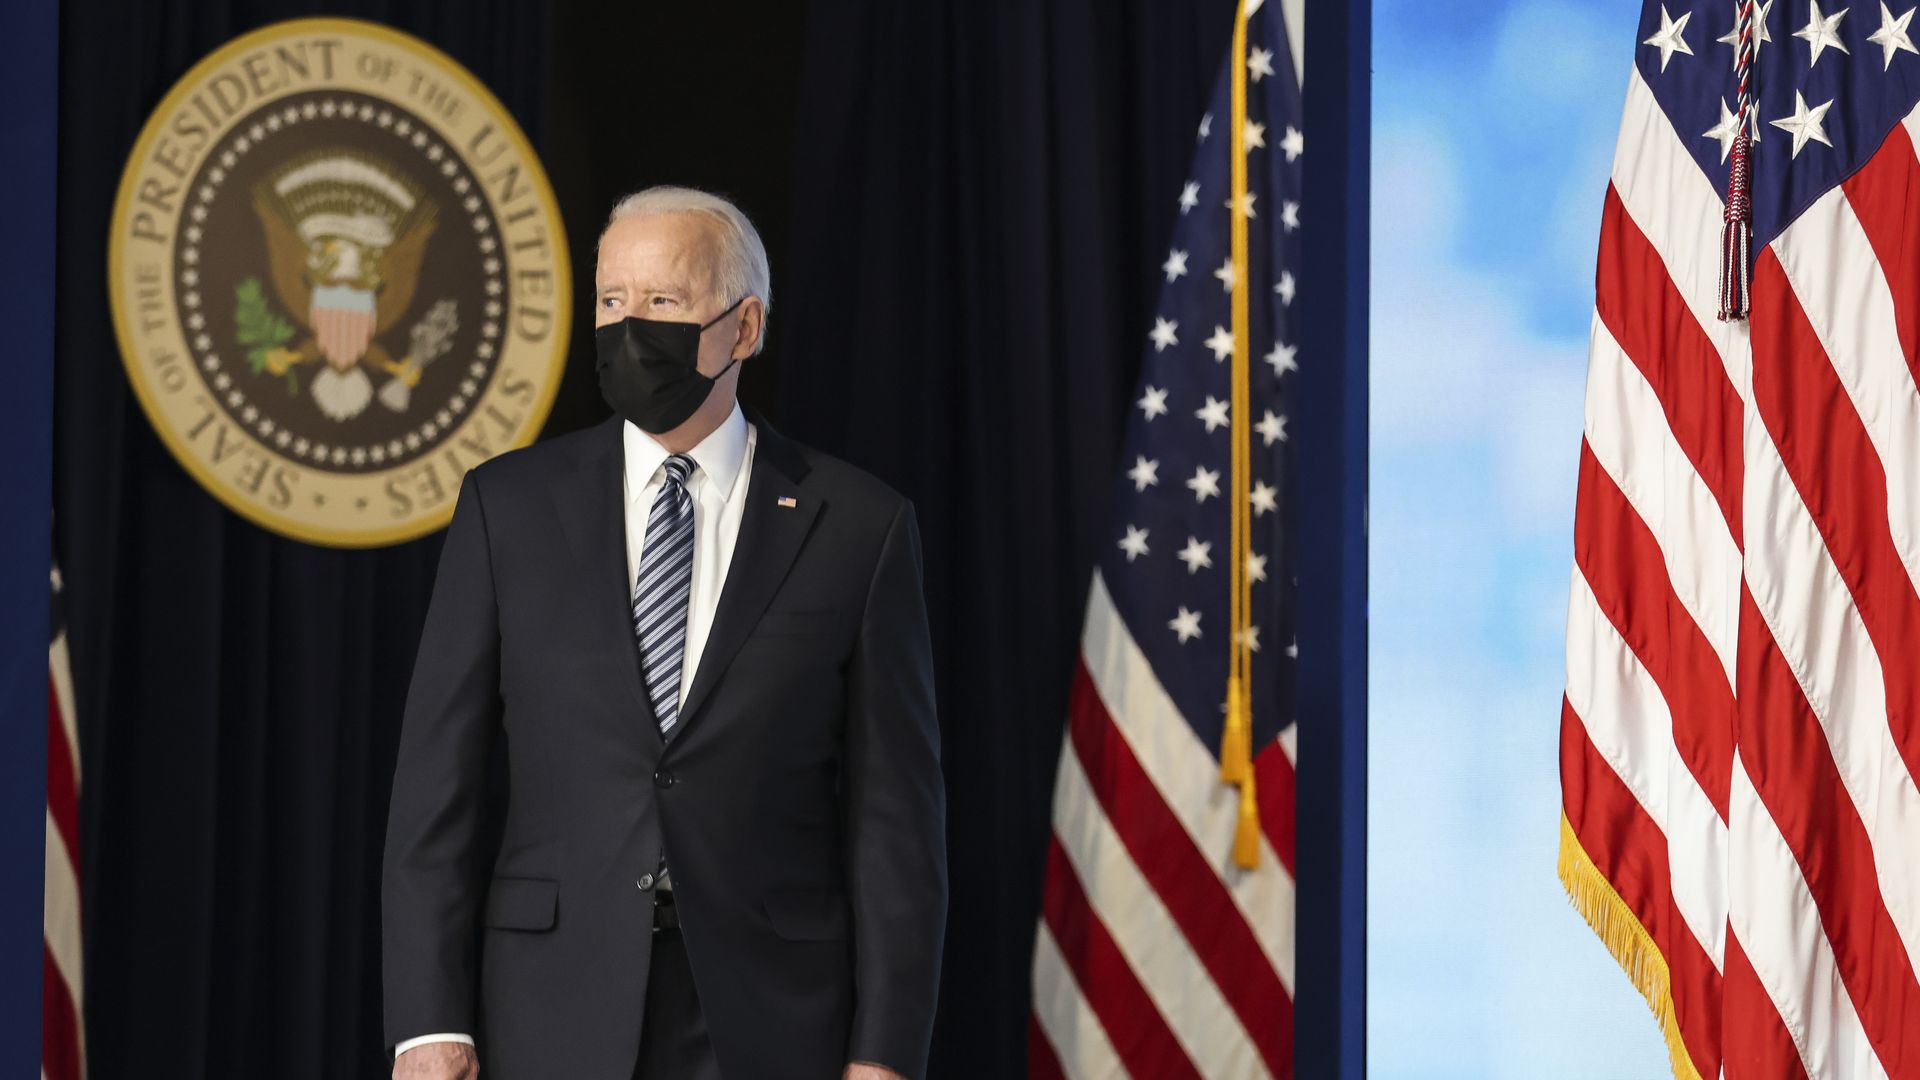 President Biden is seen arriving at a White House event on Wednesday.